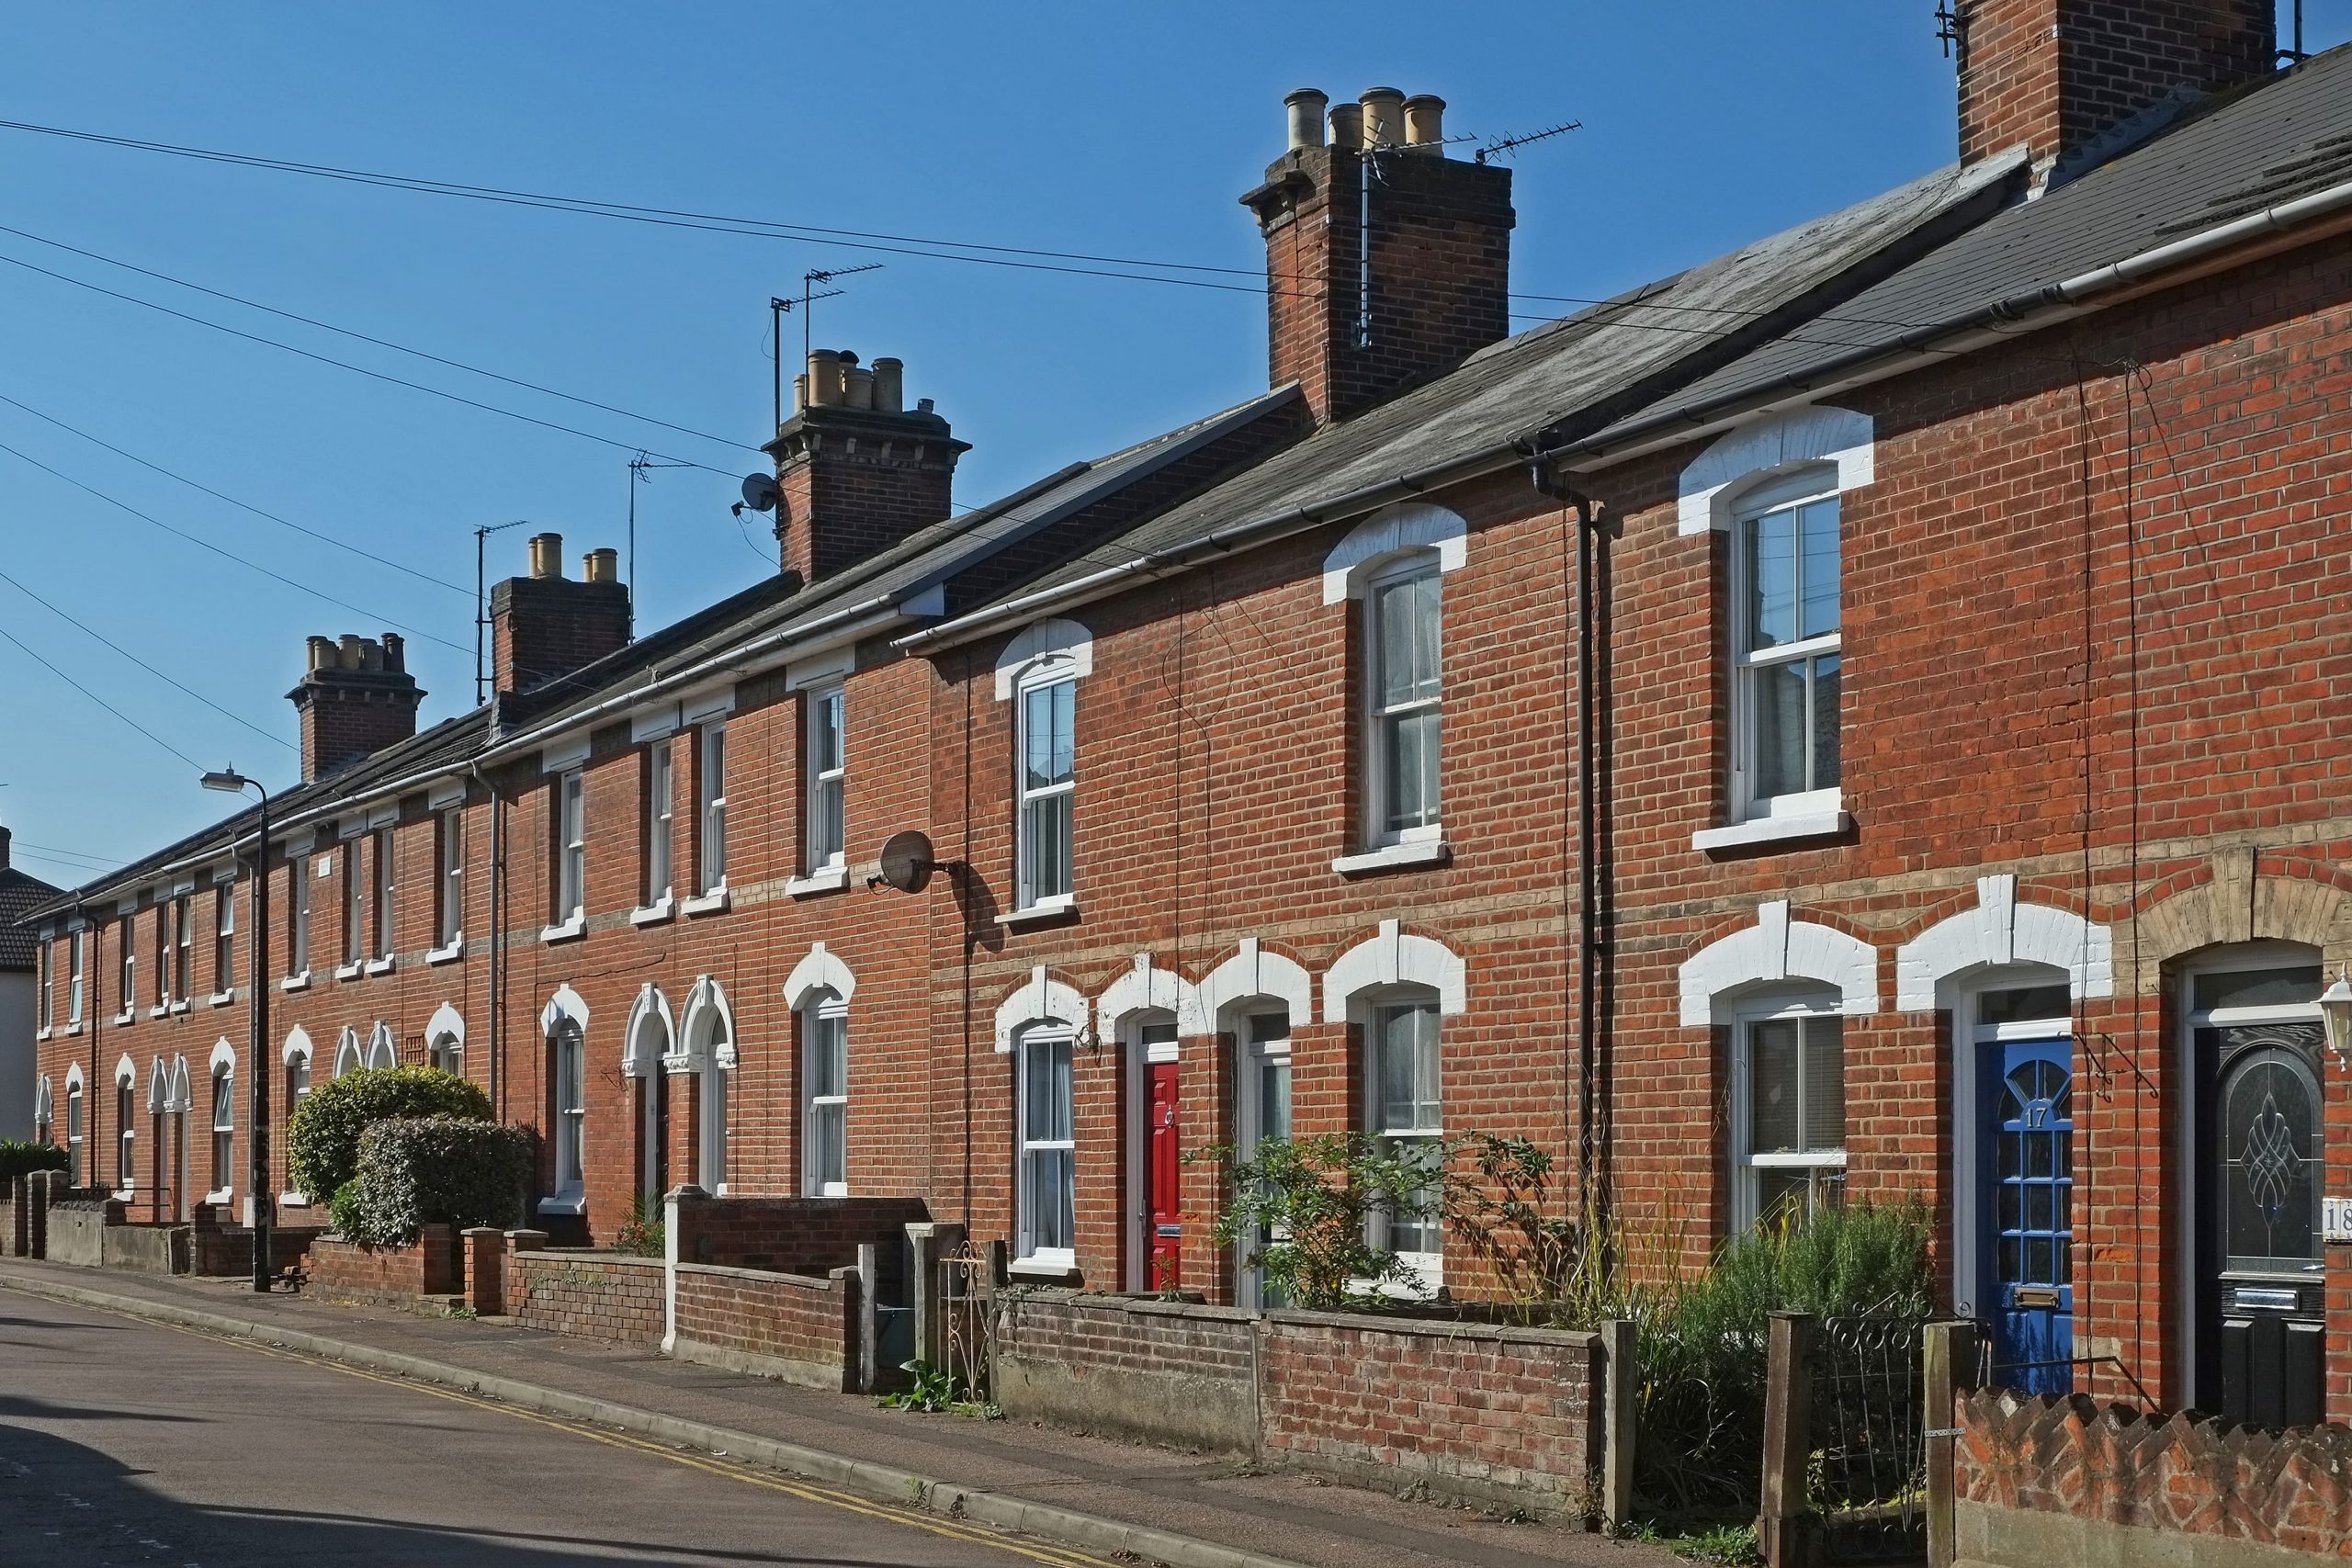 Row of victorian terrace houses in the UK